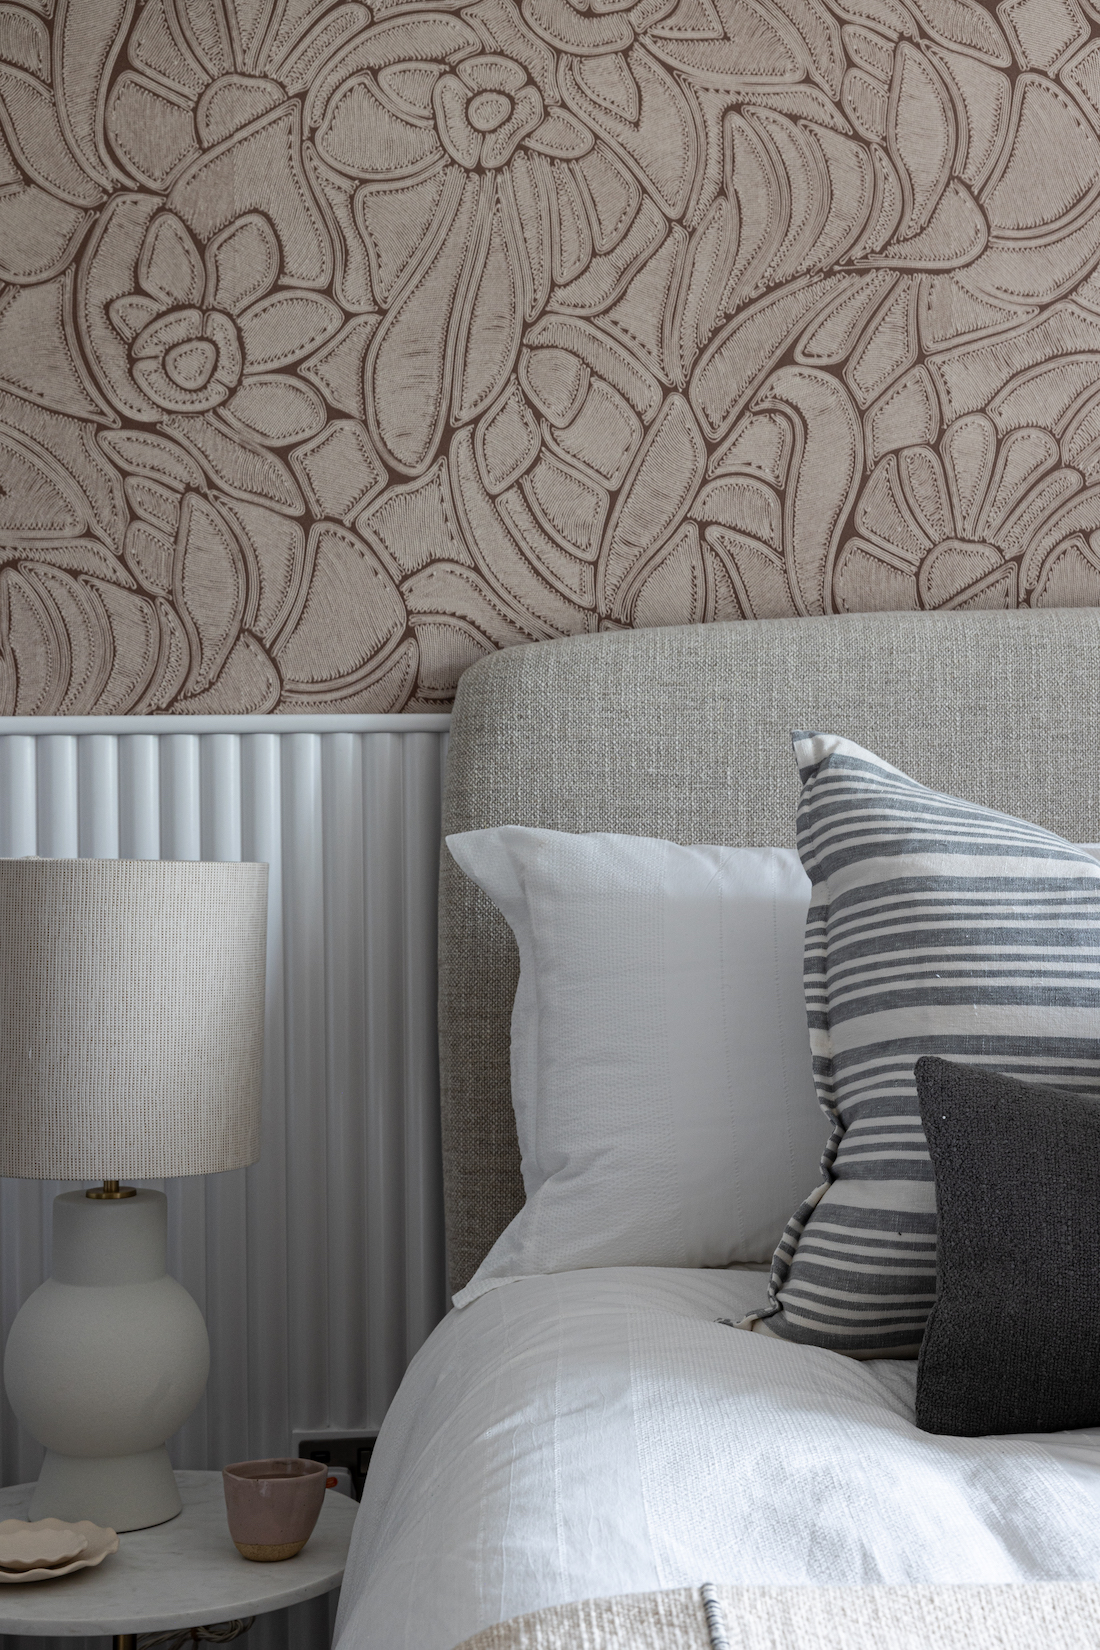 urban contemporary bespoke bedroom design with bespoke headboard, bespoke fluted wall joinery and rope texture fabric wallcoverings